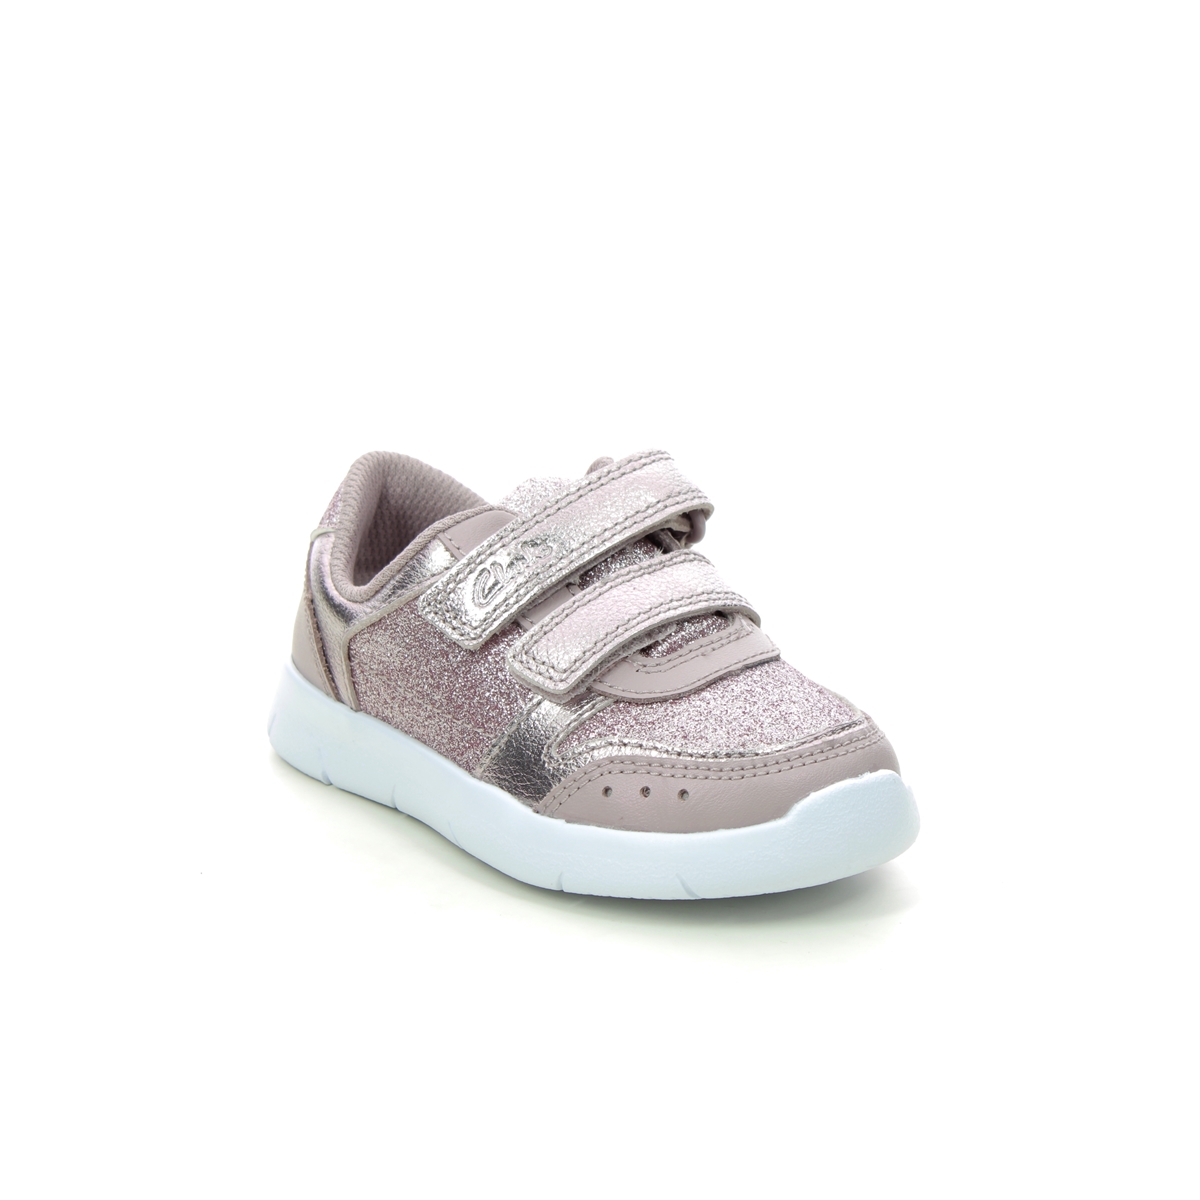 Clarks Ath Sonar T Pink Kids Toddler Girls Trainers 683726F In Size 5.5 In Plain Pink F Width Fitting Regular Fit For kids